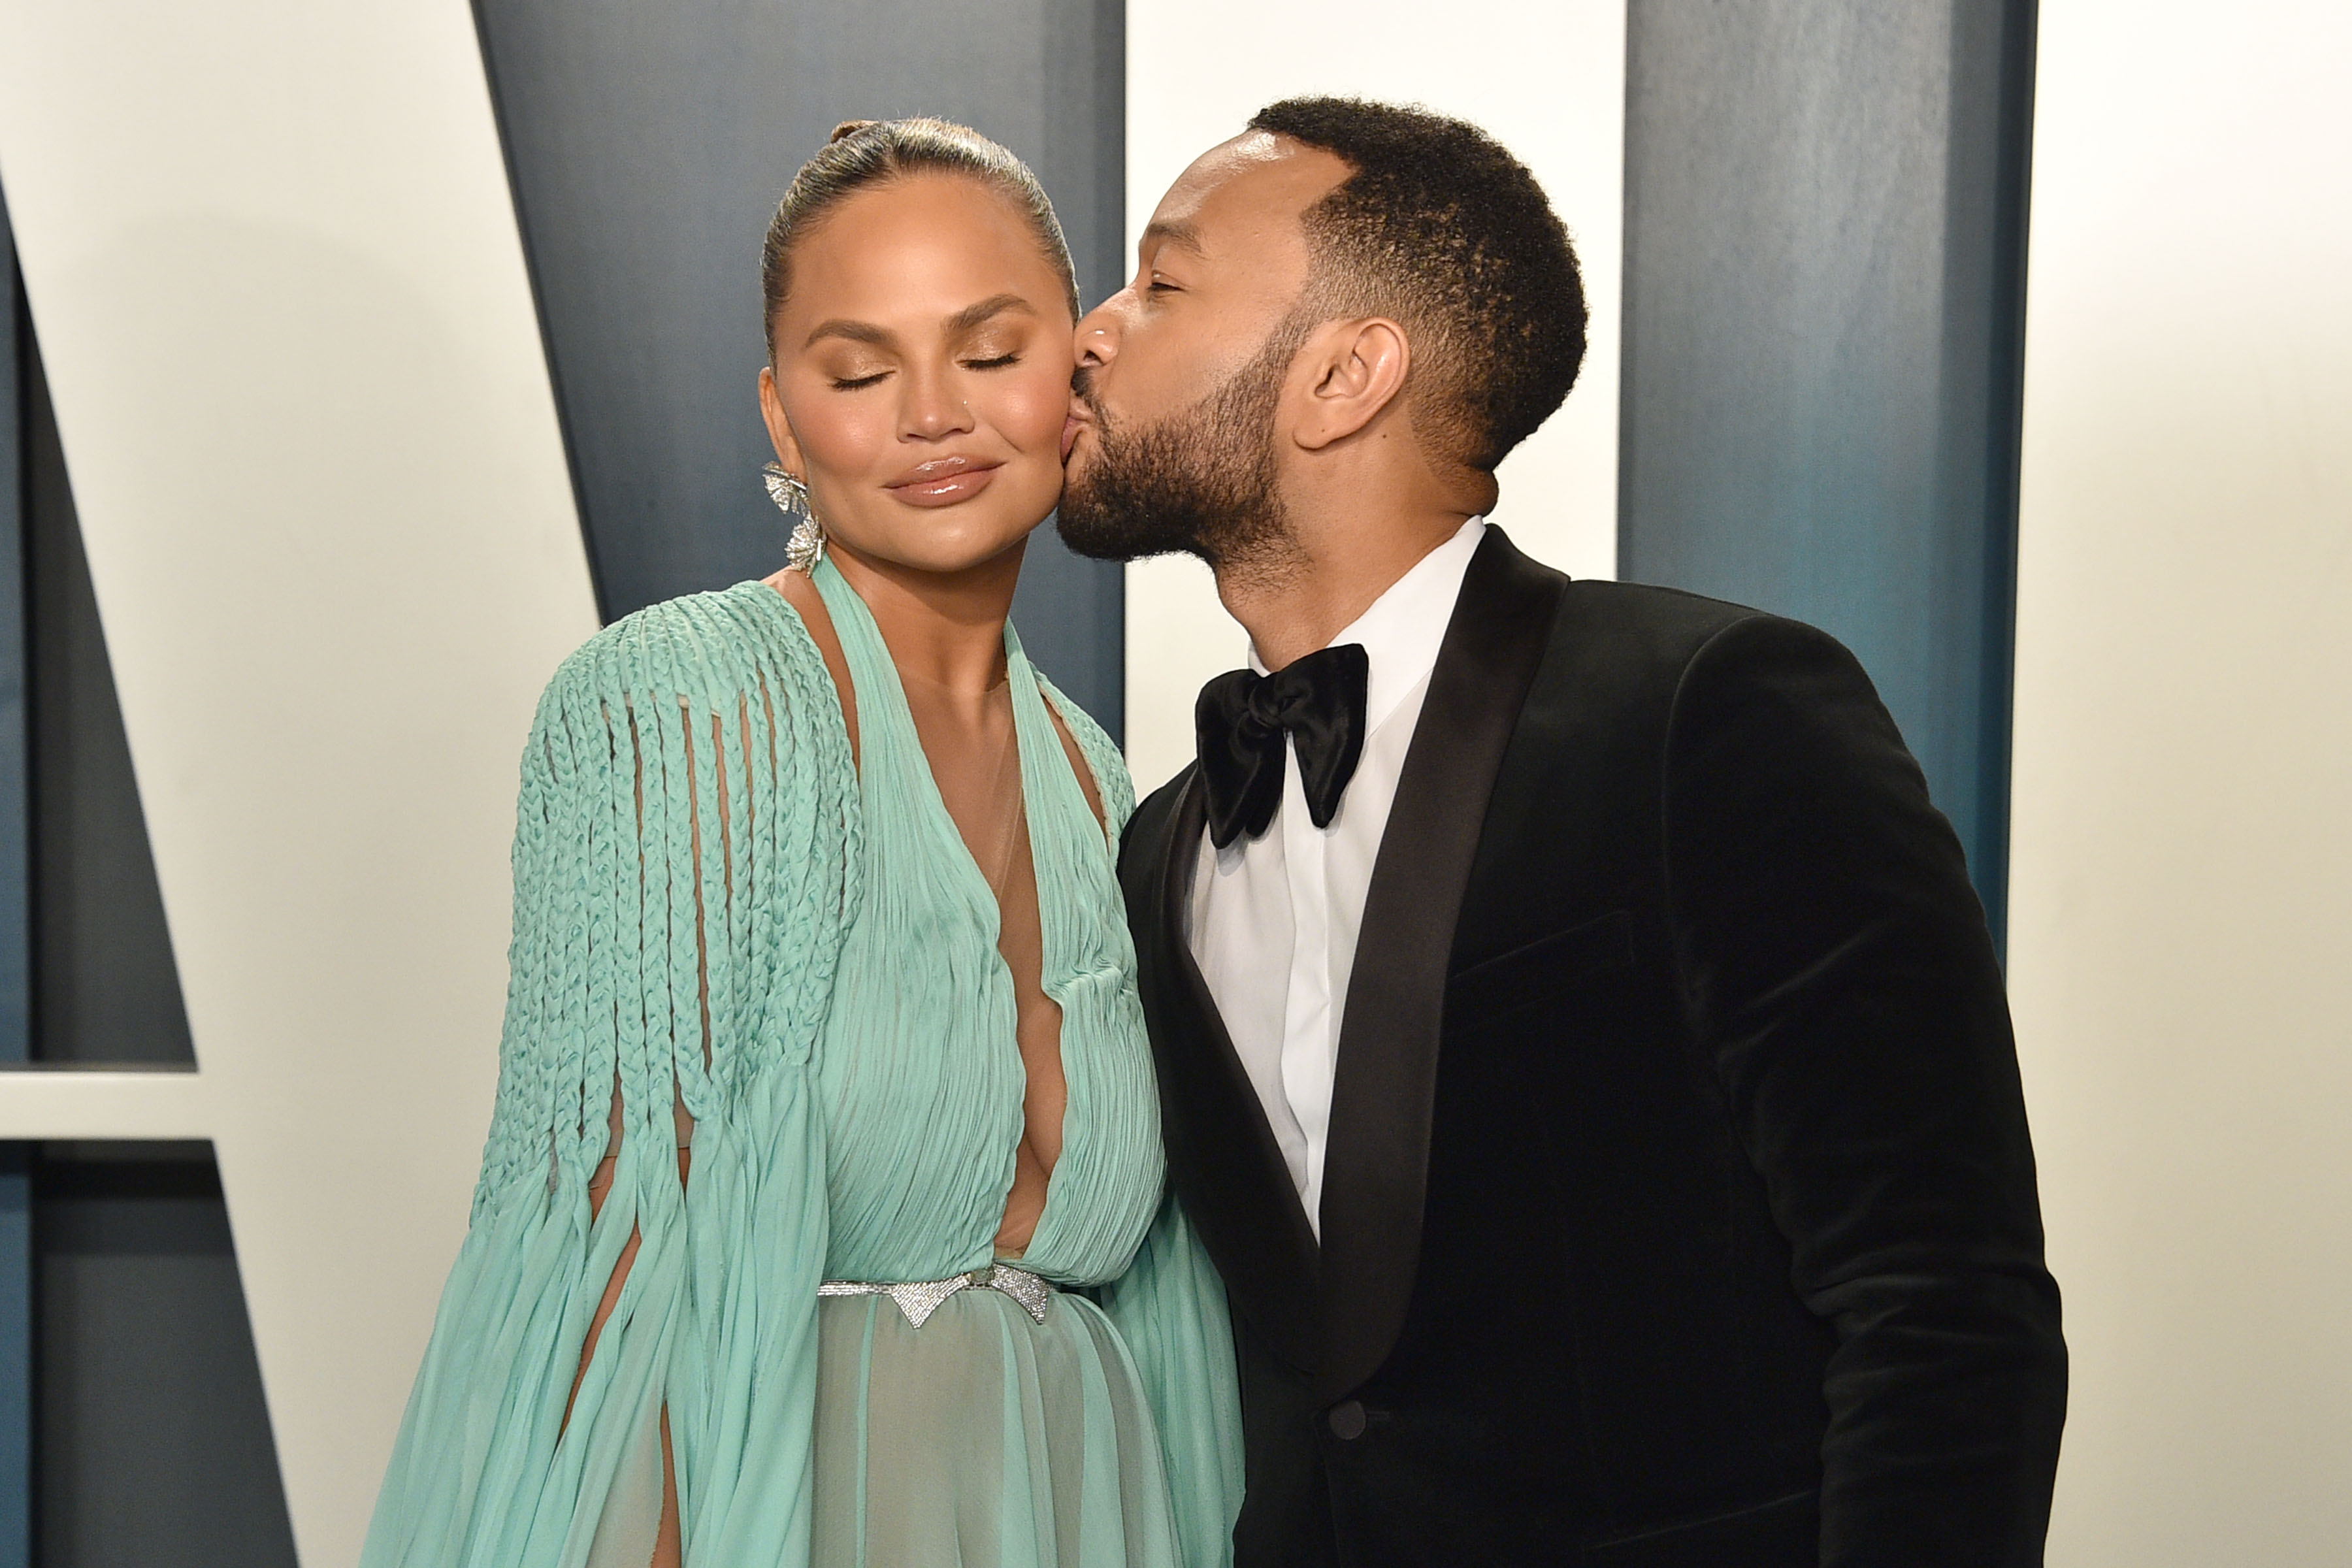 Chrissy Teigen and John Legend attend the 2020 Vanity Fair Oscar Party at Wallis Annenberg Center for the Performing Arts